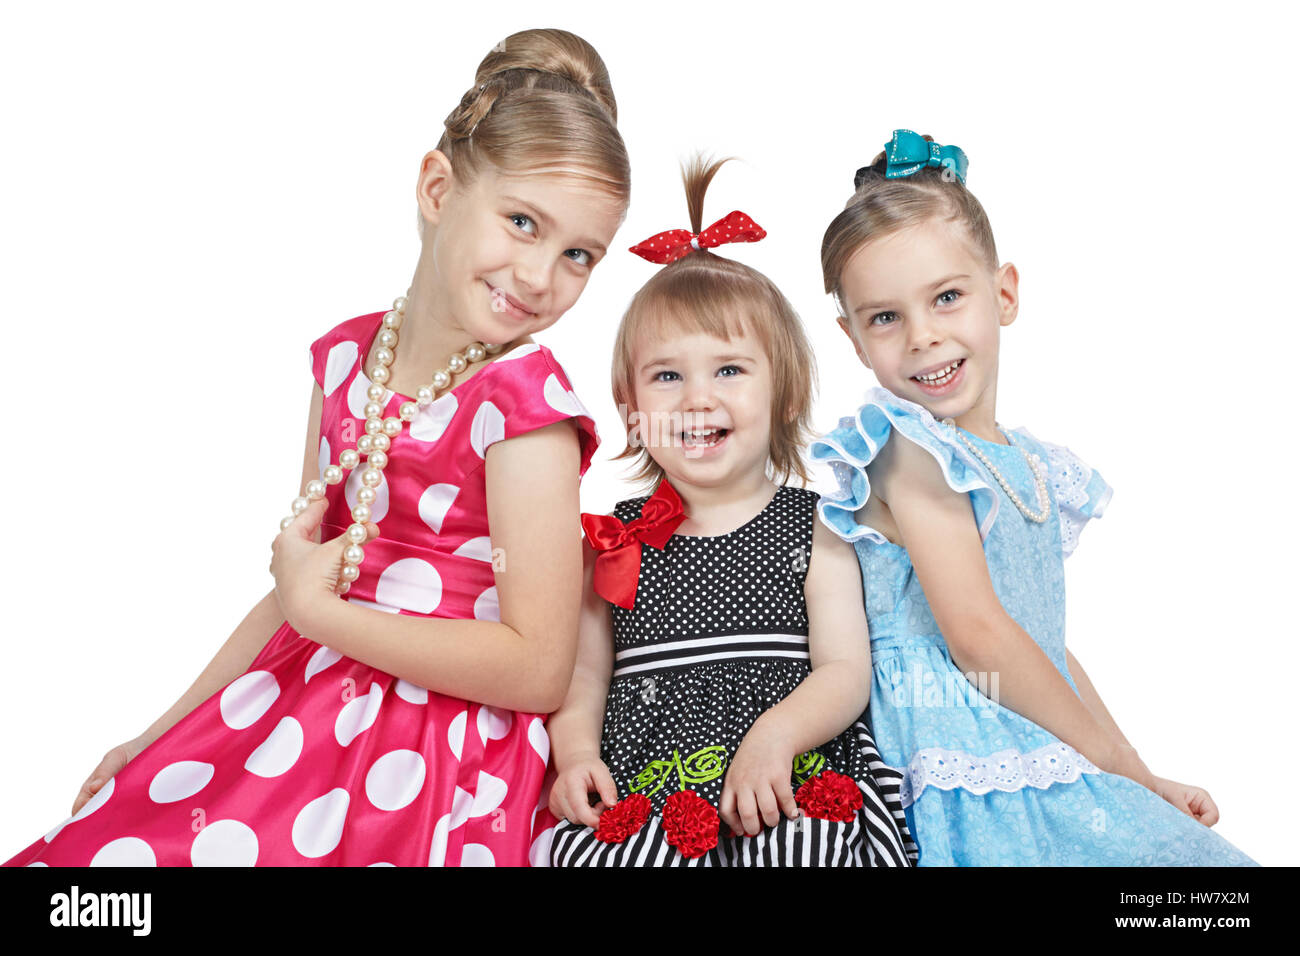 Portrait of three cheerful sisters on a white background Stock Photo